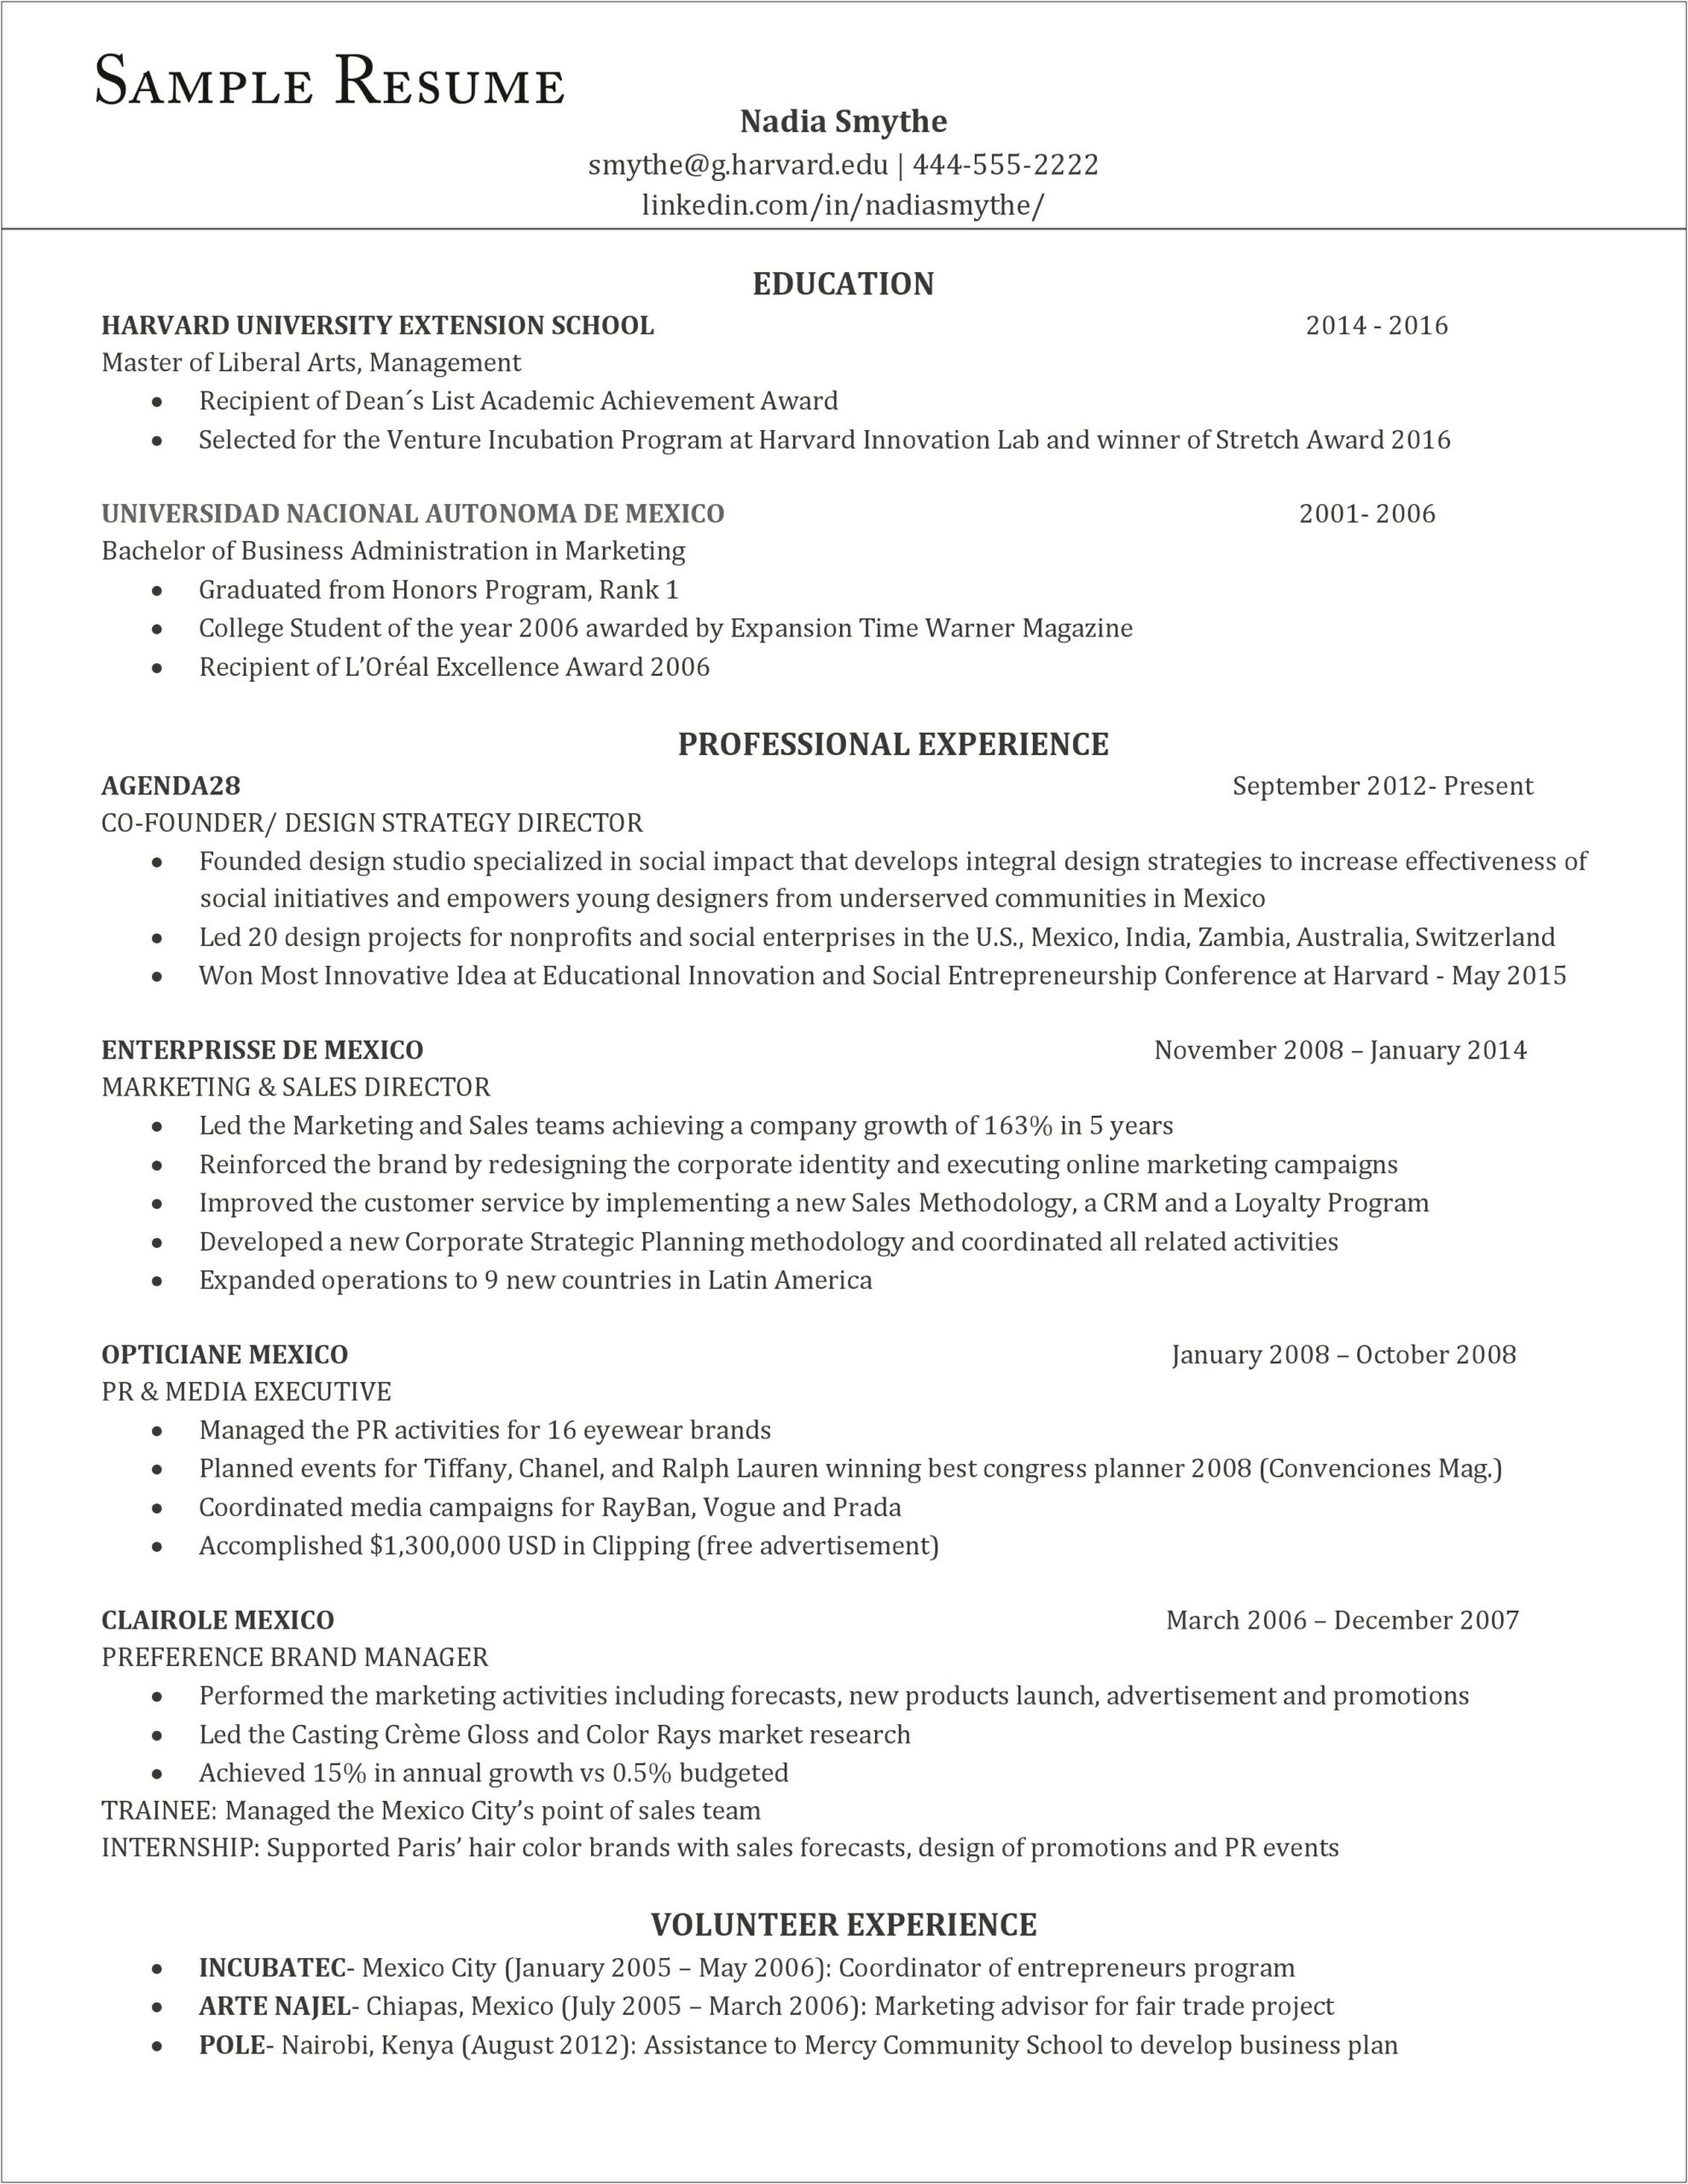 Best Other Interest For Resume